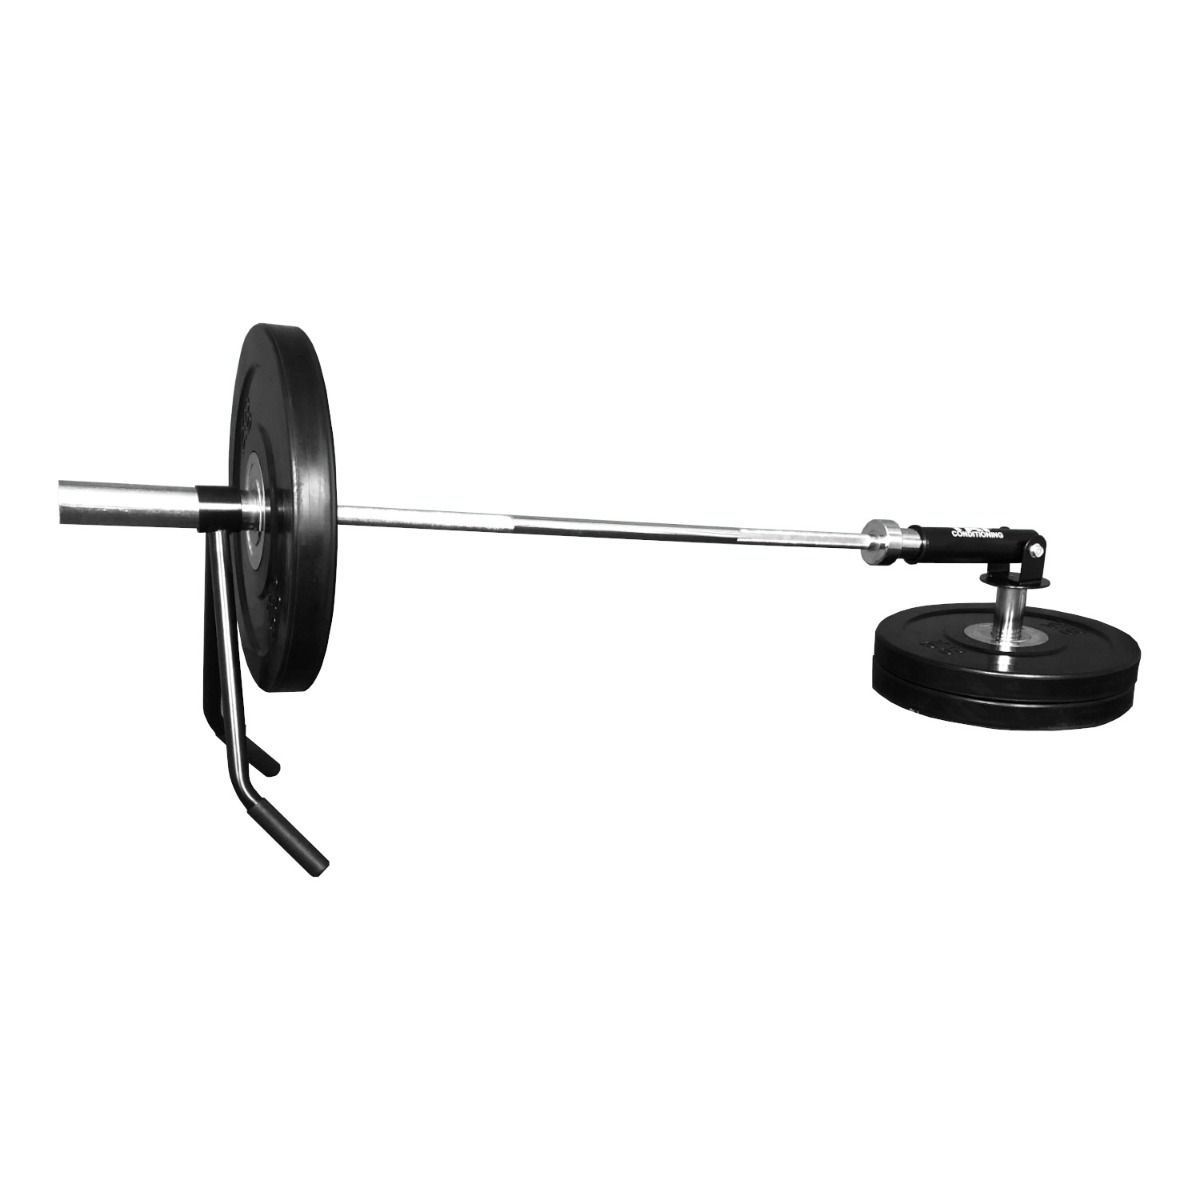 TAP™ Rotational Core Trainer